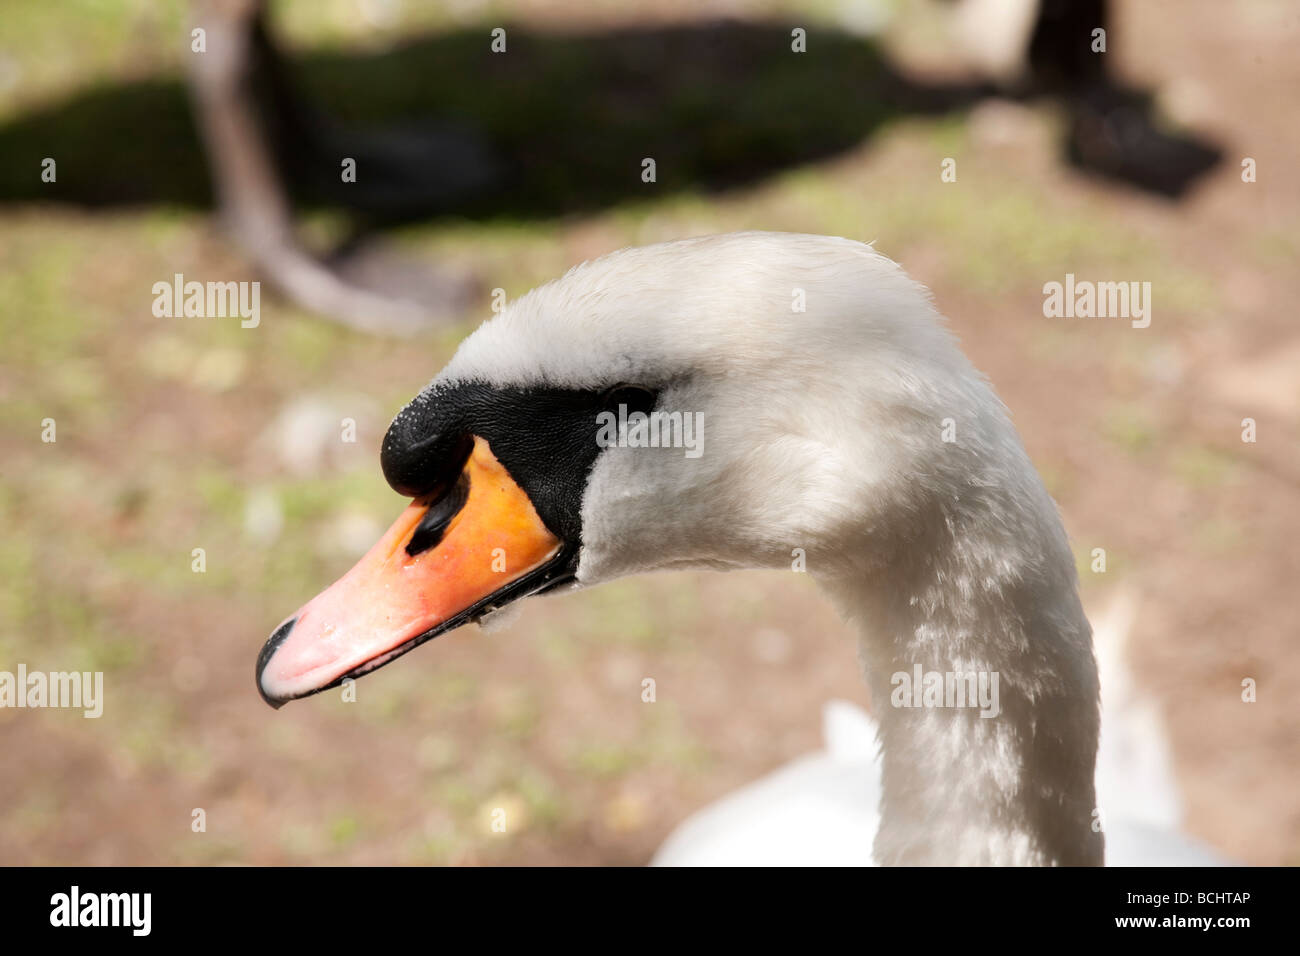 close up of a swan s head and neck Stock Photo